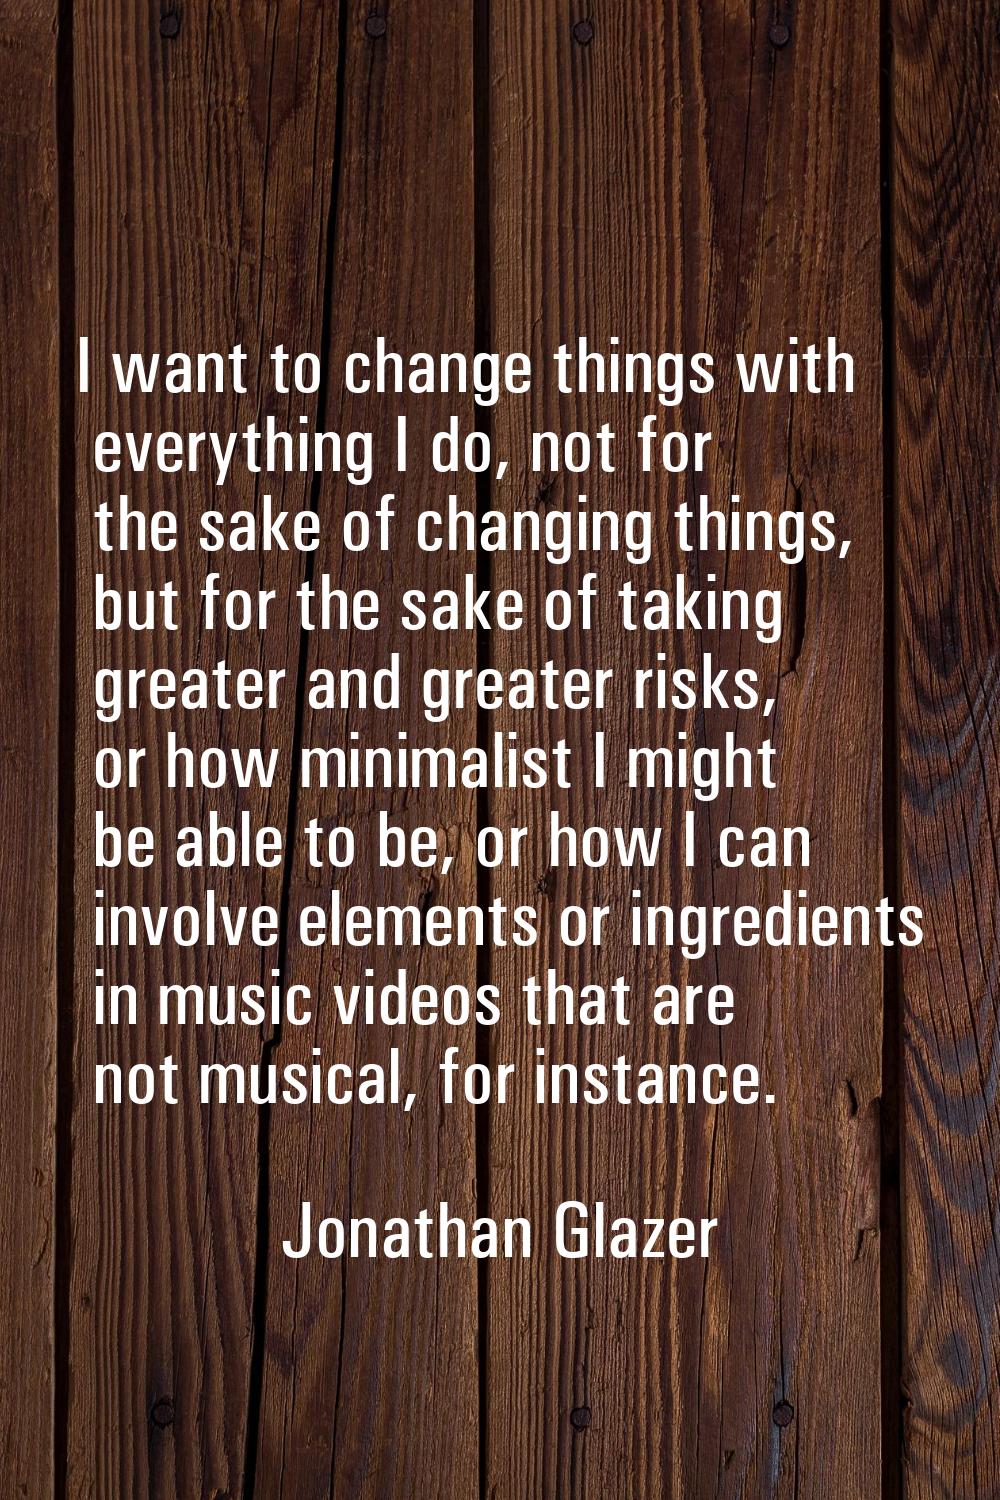 I want to change things with everything I do, not for the sake of changing things, but for the sake